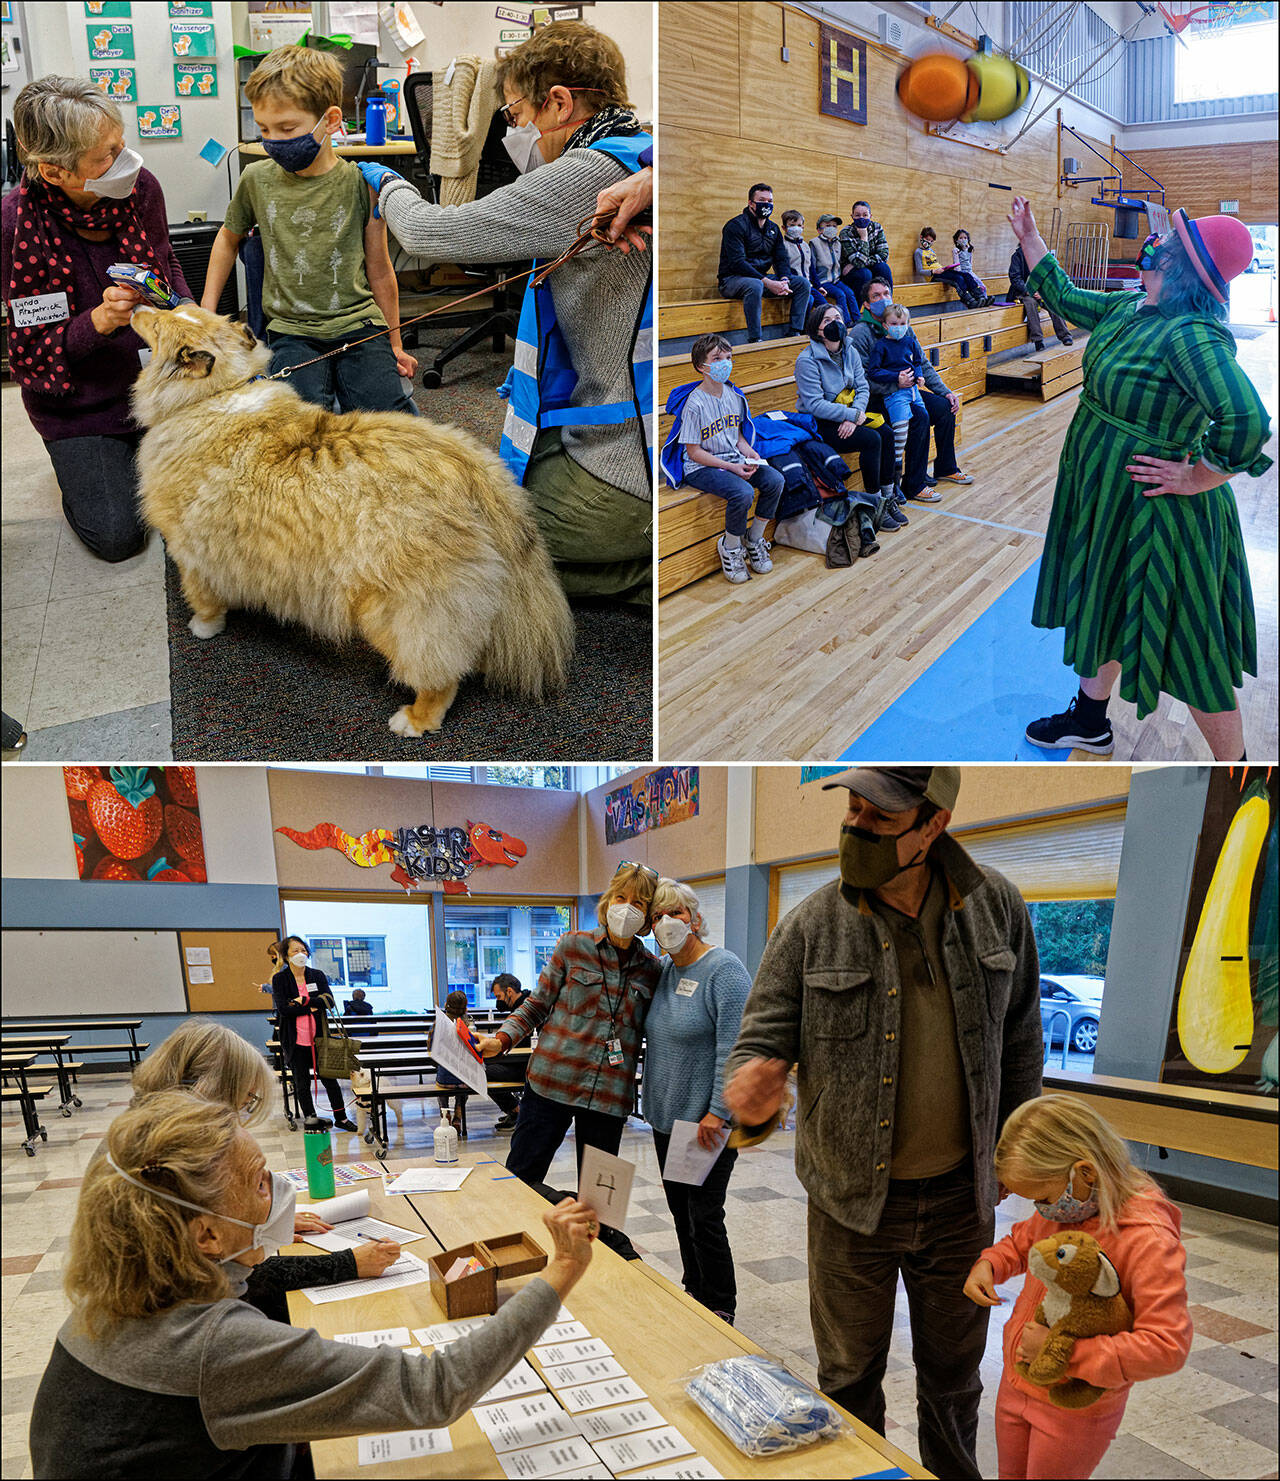 (Rick Wallace Photos, with permission of parents and children)	Six-year-old Silas Gray (top left) got his shot with comfort dog, Maddie, by his side, along with handler Mindy Melville (out of the picture). Clown Luz Gaxiola (top right) kept families entertained for the 15-minute post-shot observation period. Check-in was smooth as Dr. Mary Bergman and EOC Mass Care Section Chief Marijke van Heeswijk (center rear) assisted families at CES.